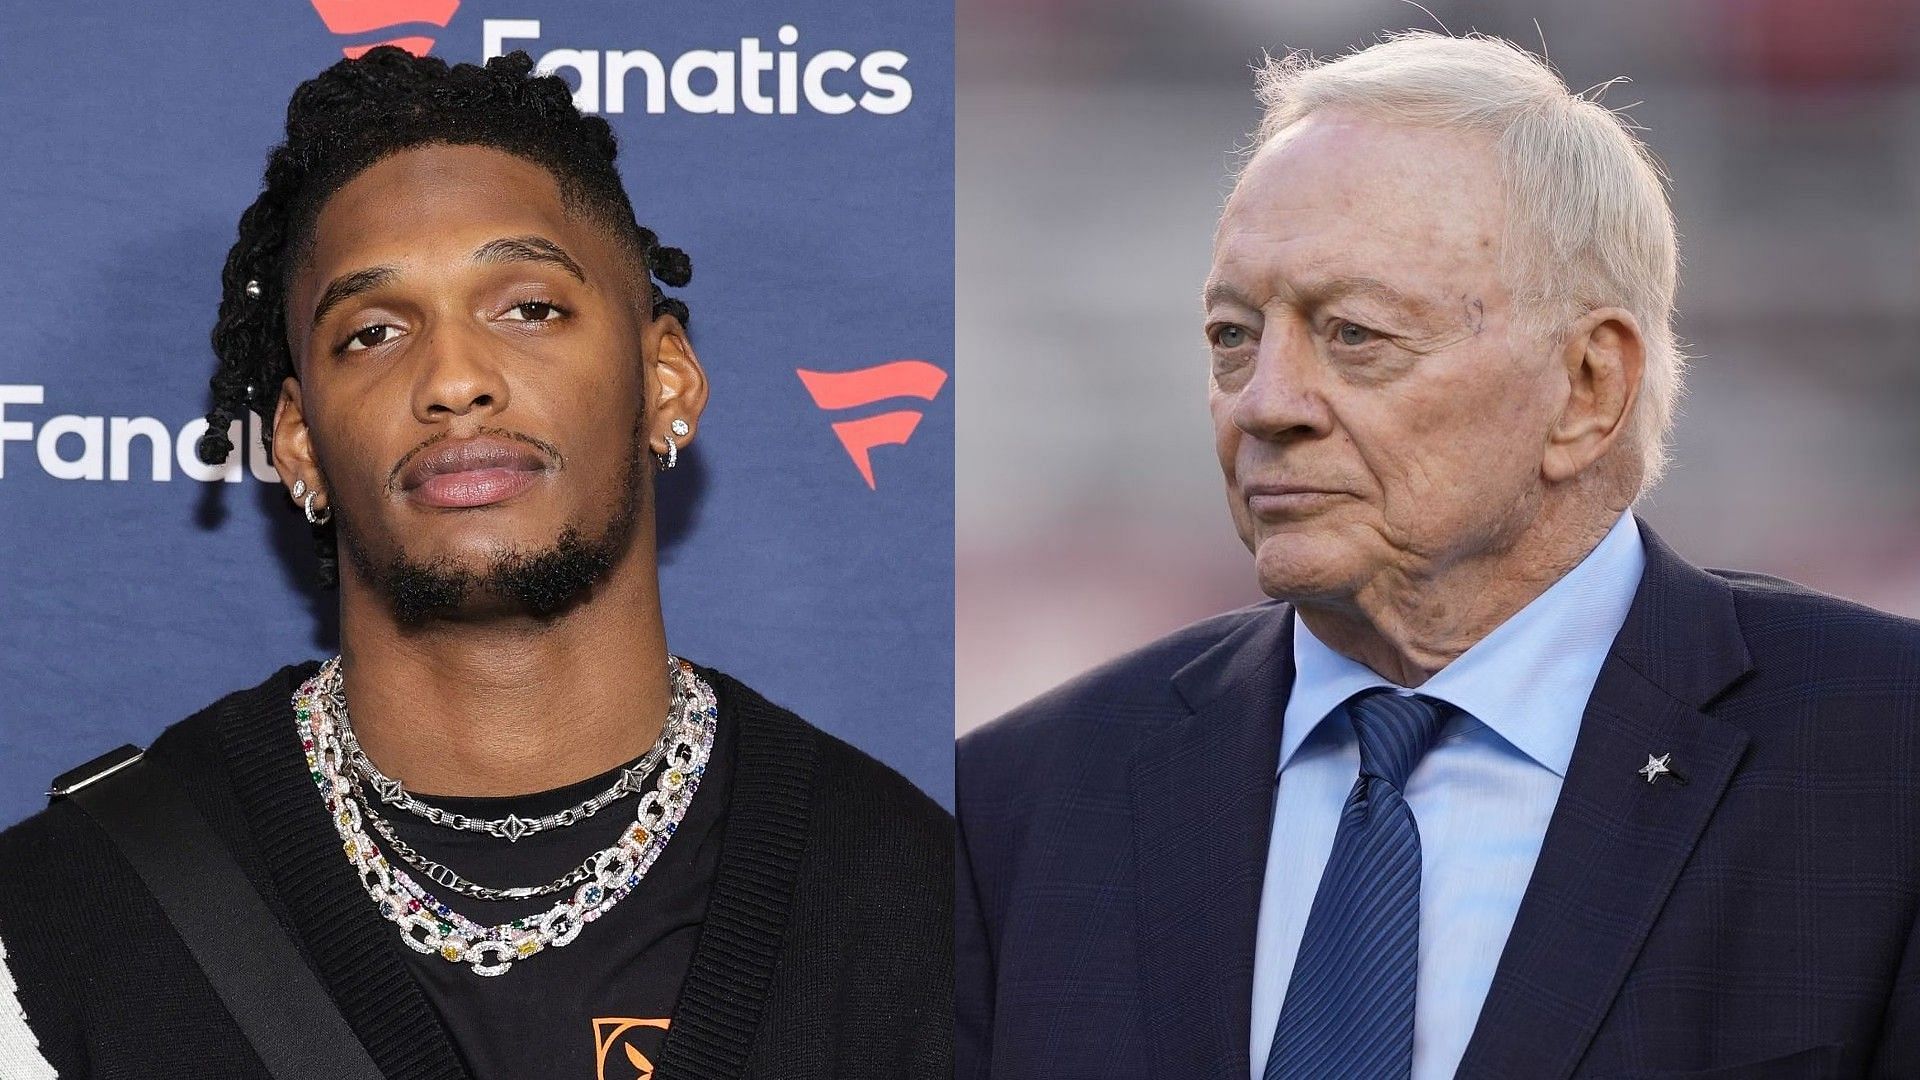 NFL analyst sheds light on disconnect between CeeDee Lamb and Jerry Jones